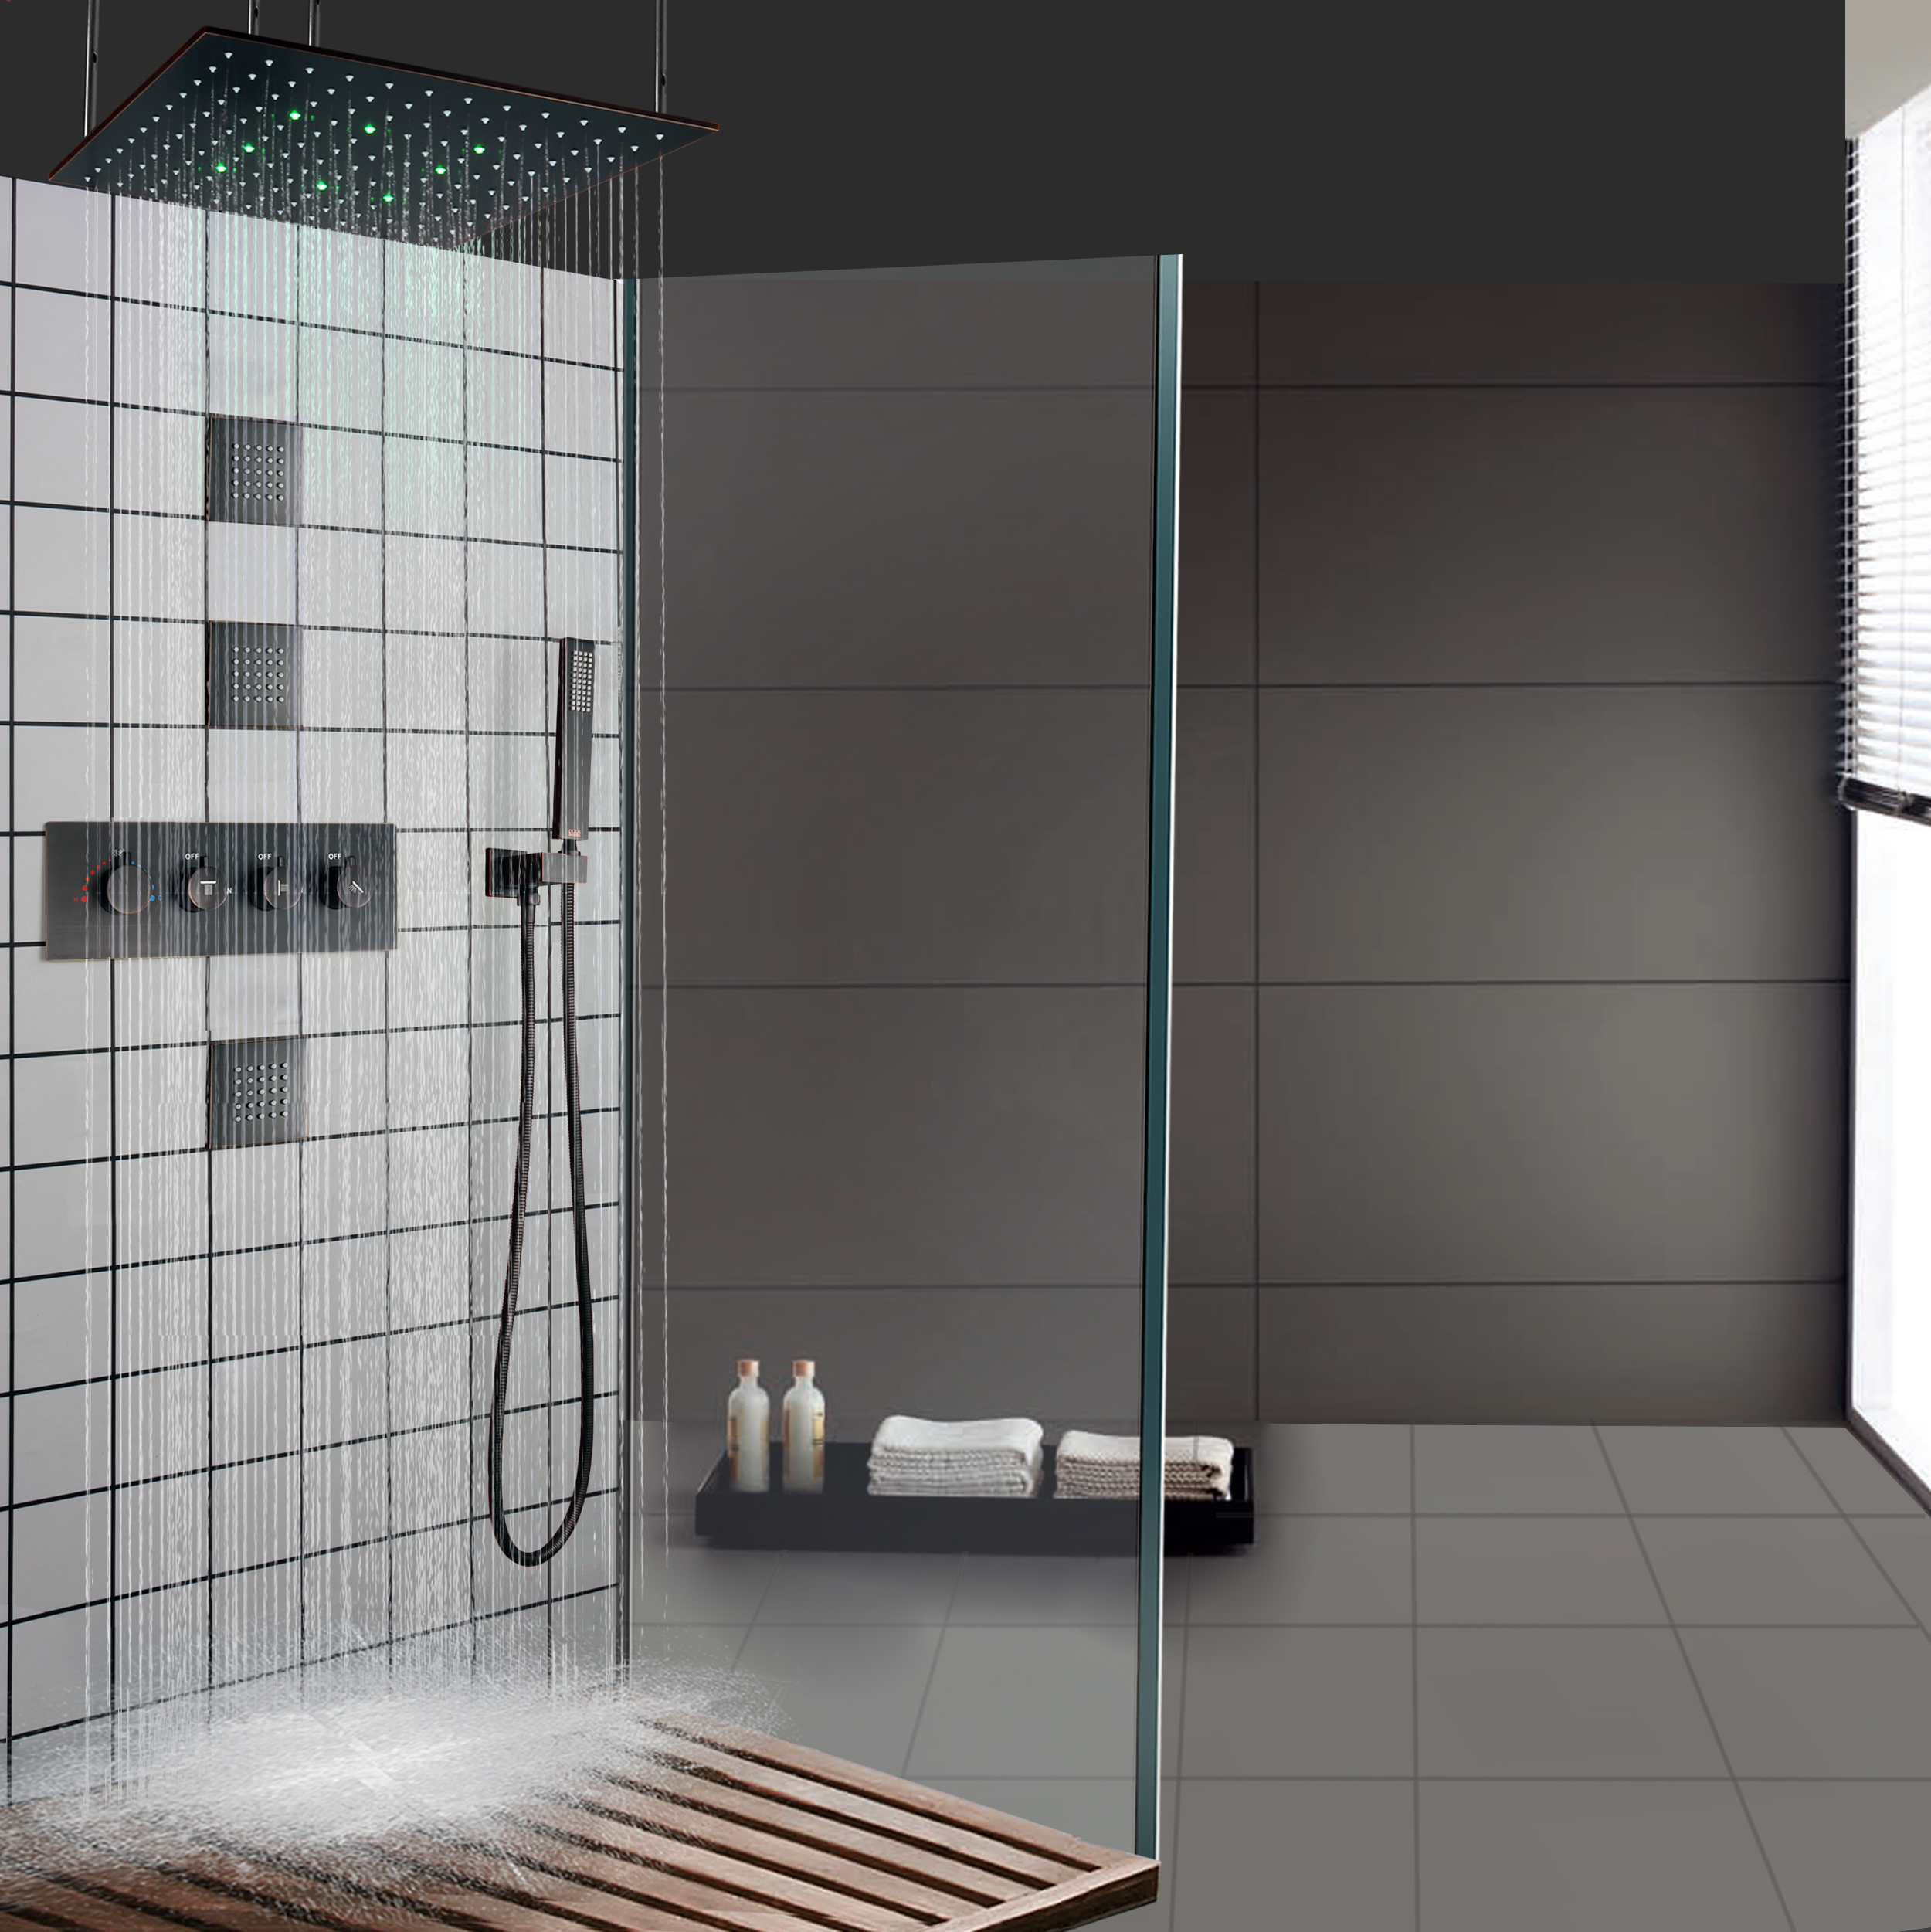 20 Inch Oil Rubbed Bronze LED Thermostatic Shower System Mixer Taps Rainfall Shower